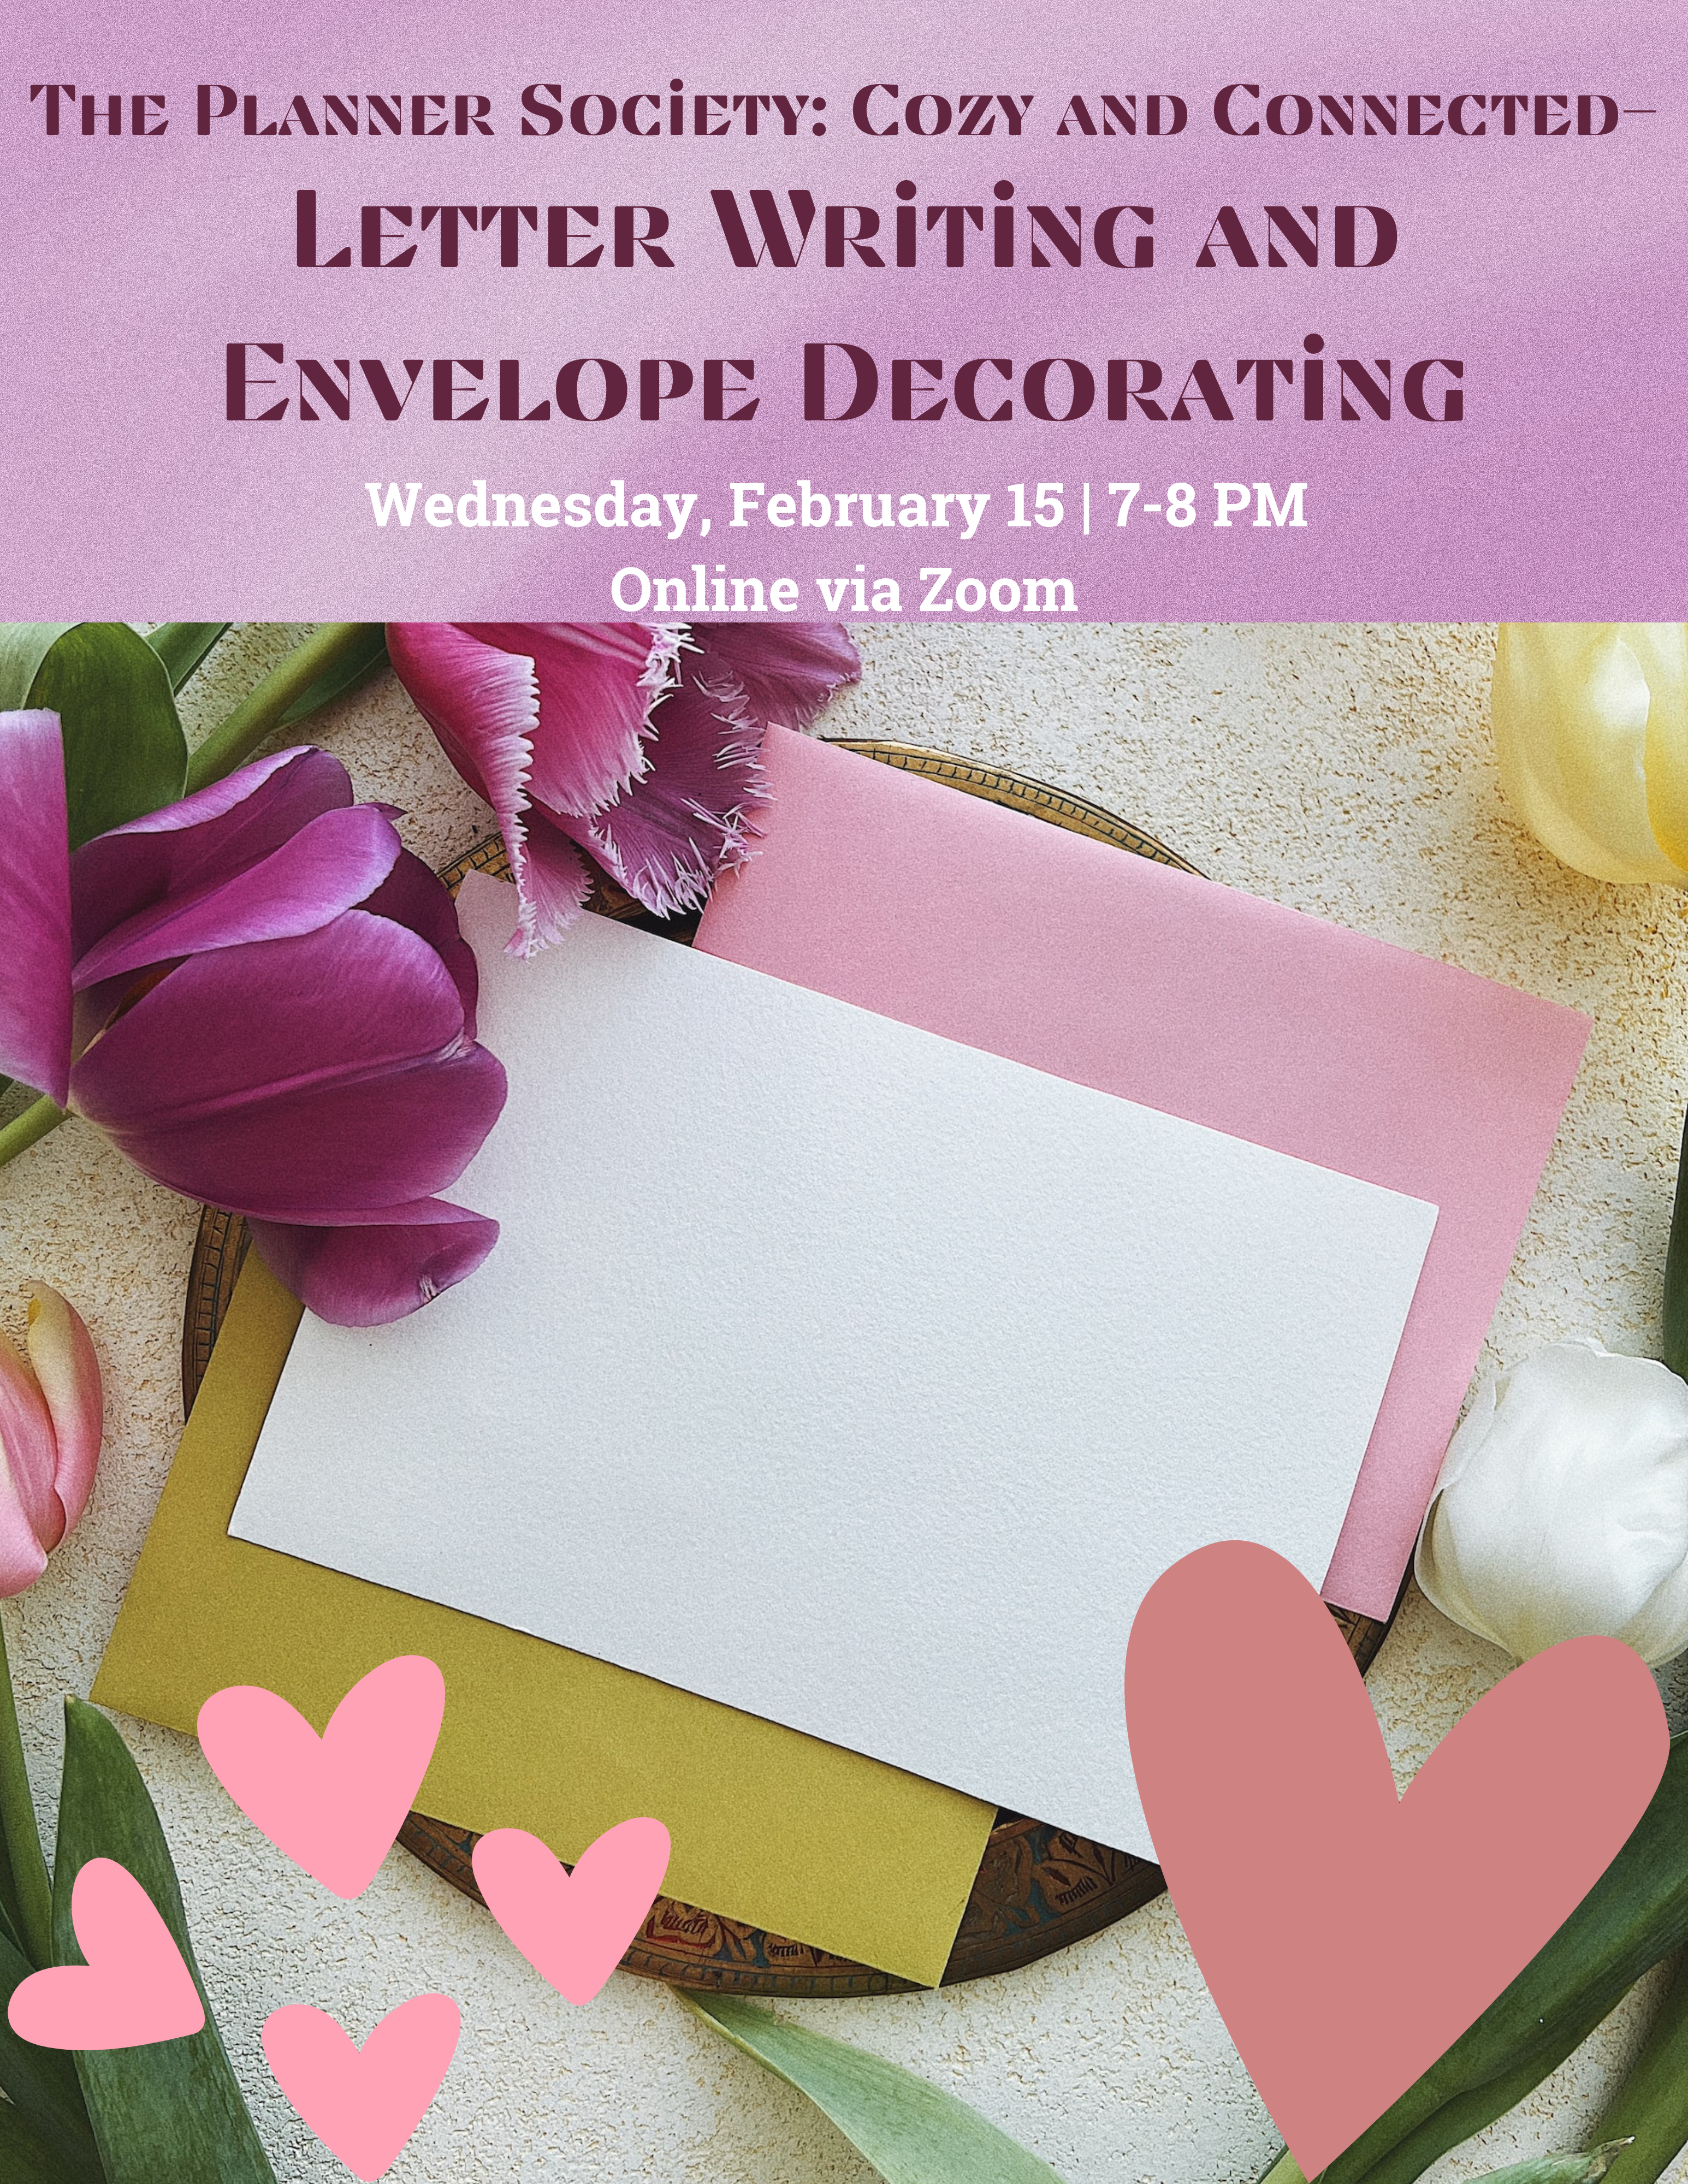 The Planner Society Cozy and Connected Letter writing and Envelope Decorating Wednesday February 15 7-8 PM online via zoom envelopes, letter hearts flowers